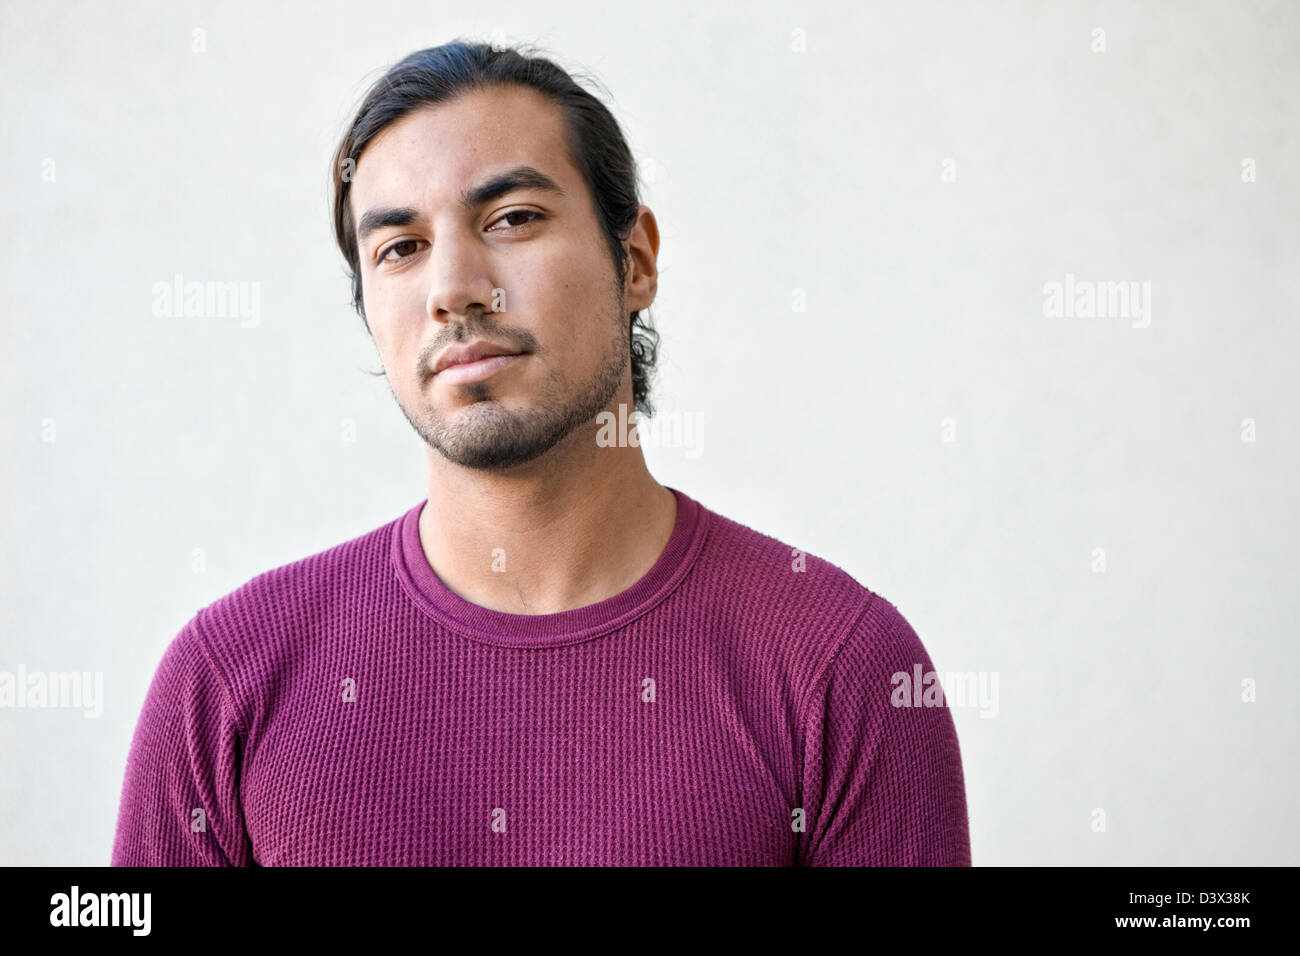 Smug and confident portrait of young long-haired adult Mexican-American male Stock Photo